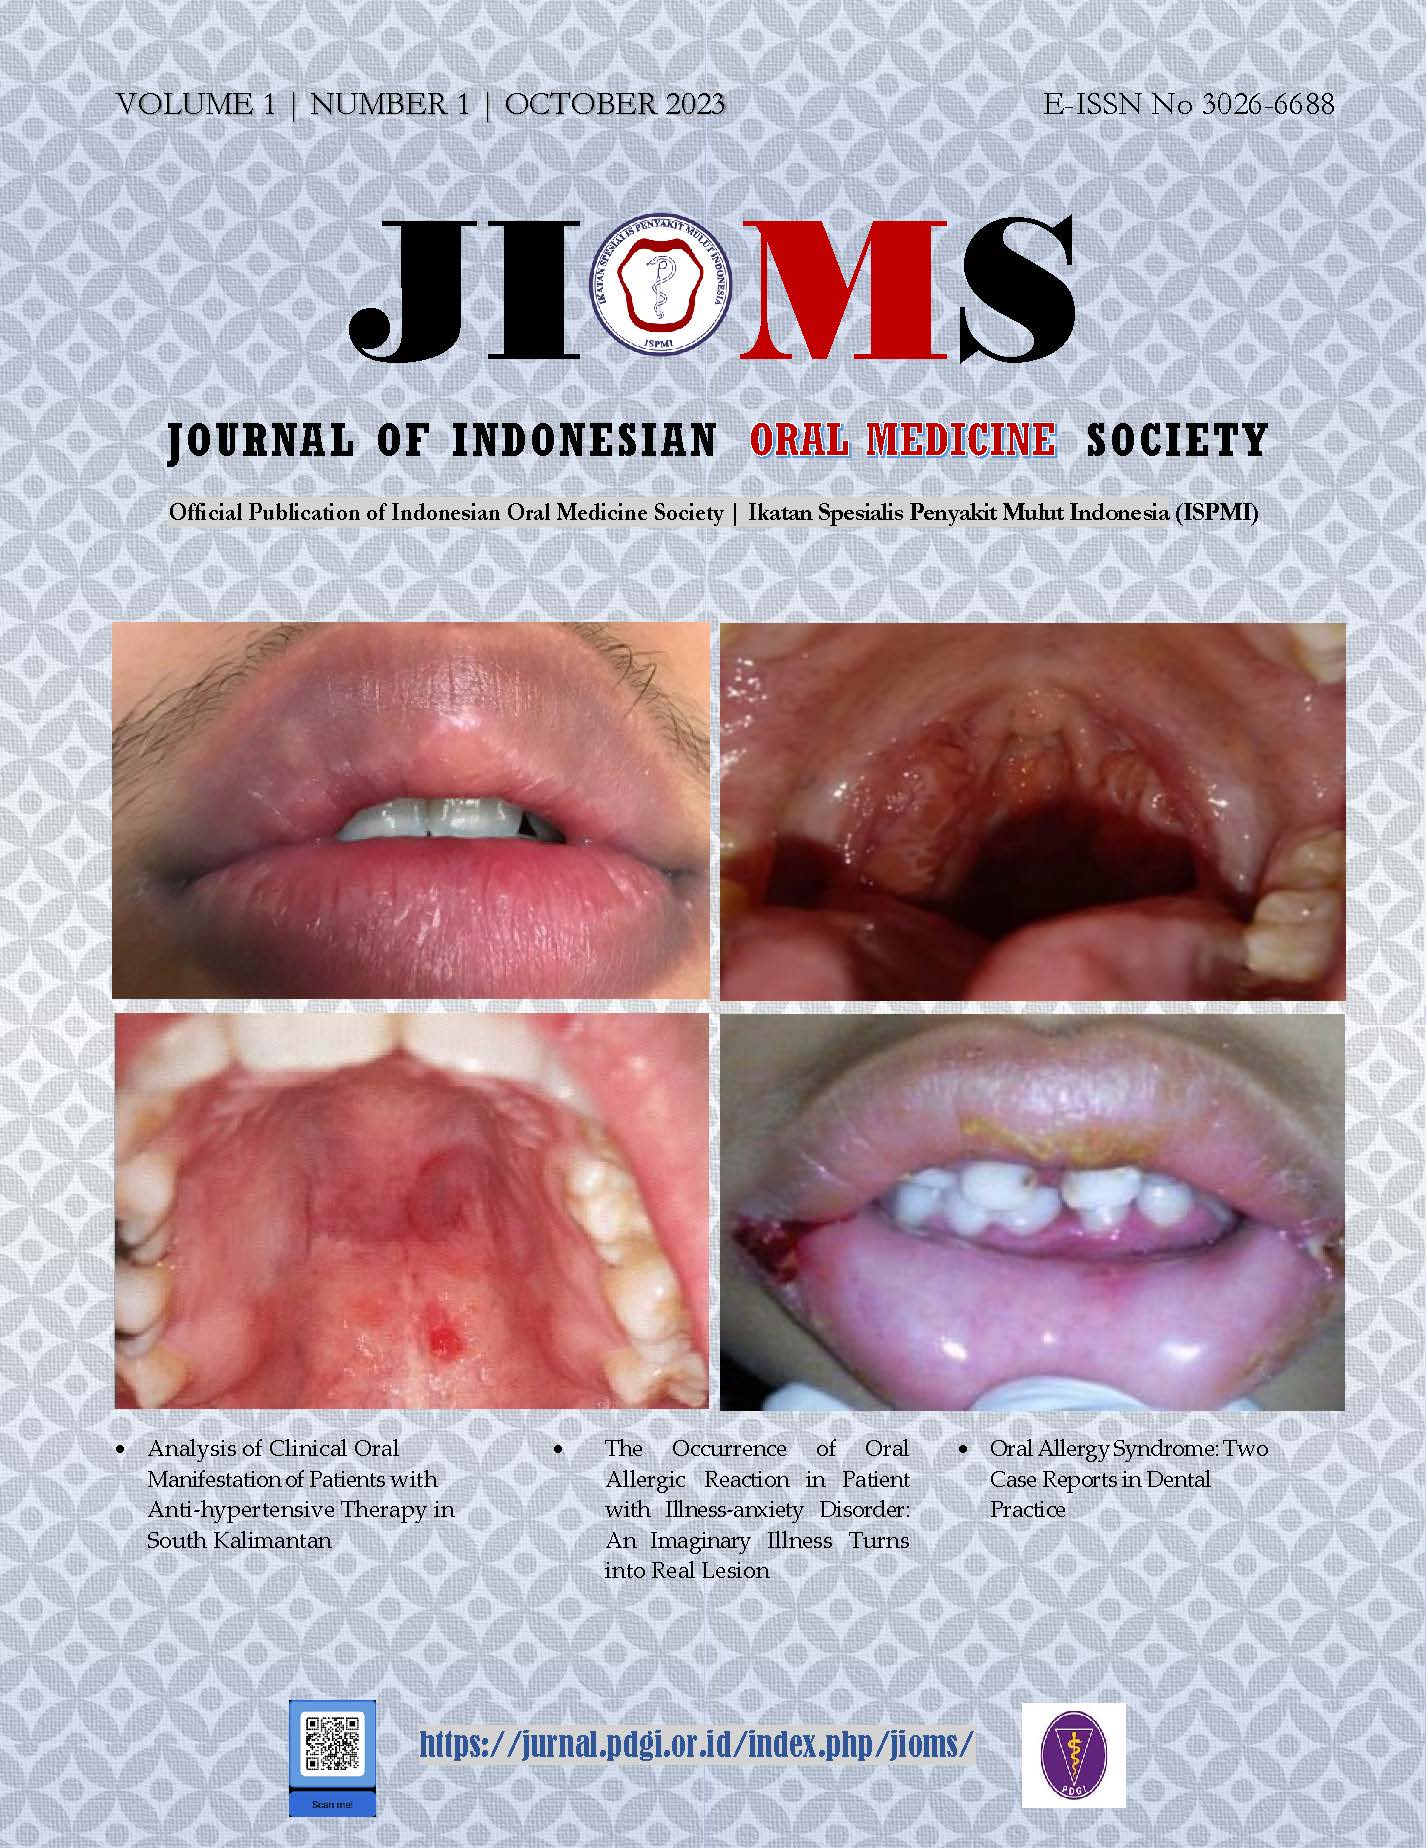 clinical pictures of oral allergic lips and other oral presentation of viral infections